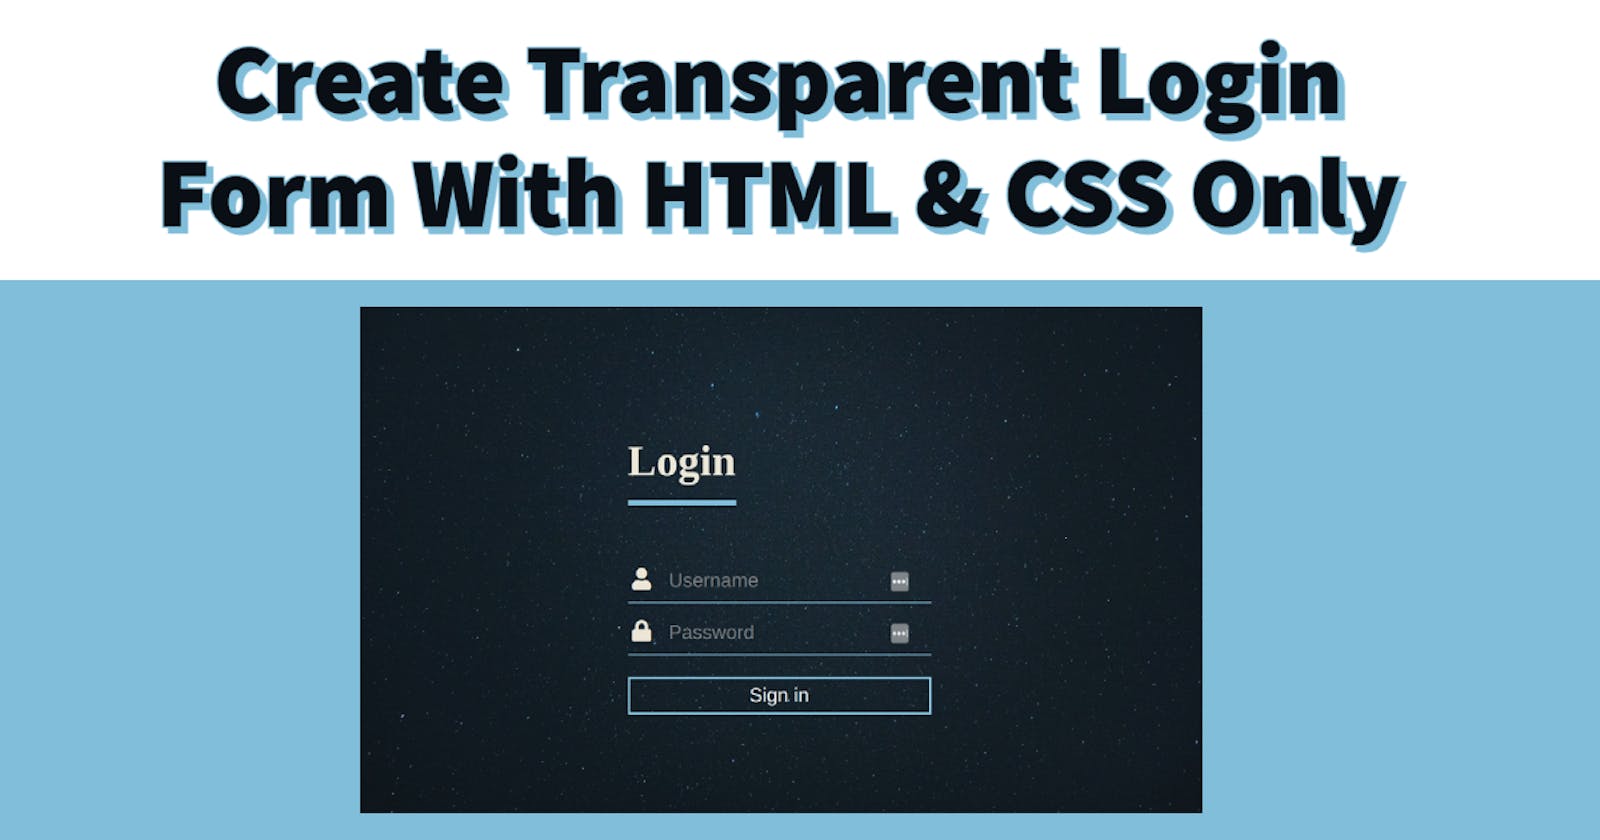 Create Transparent Login Form With HTML & CSS Only